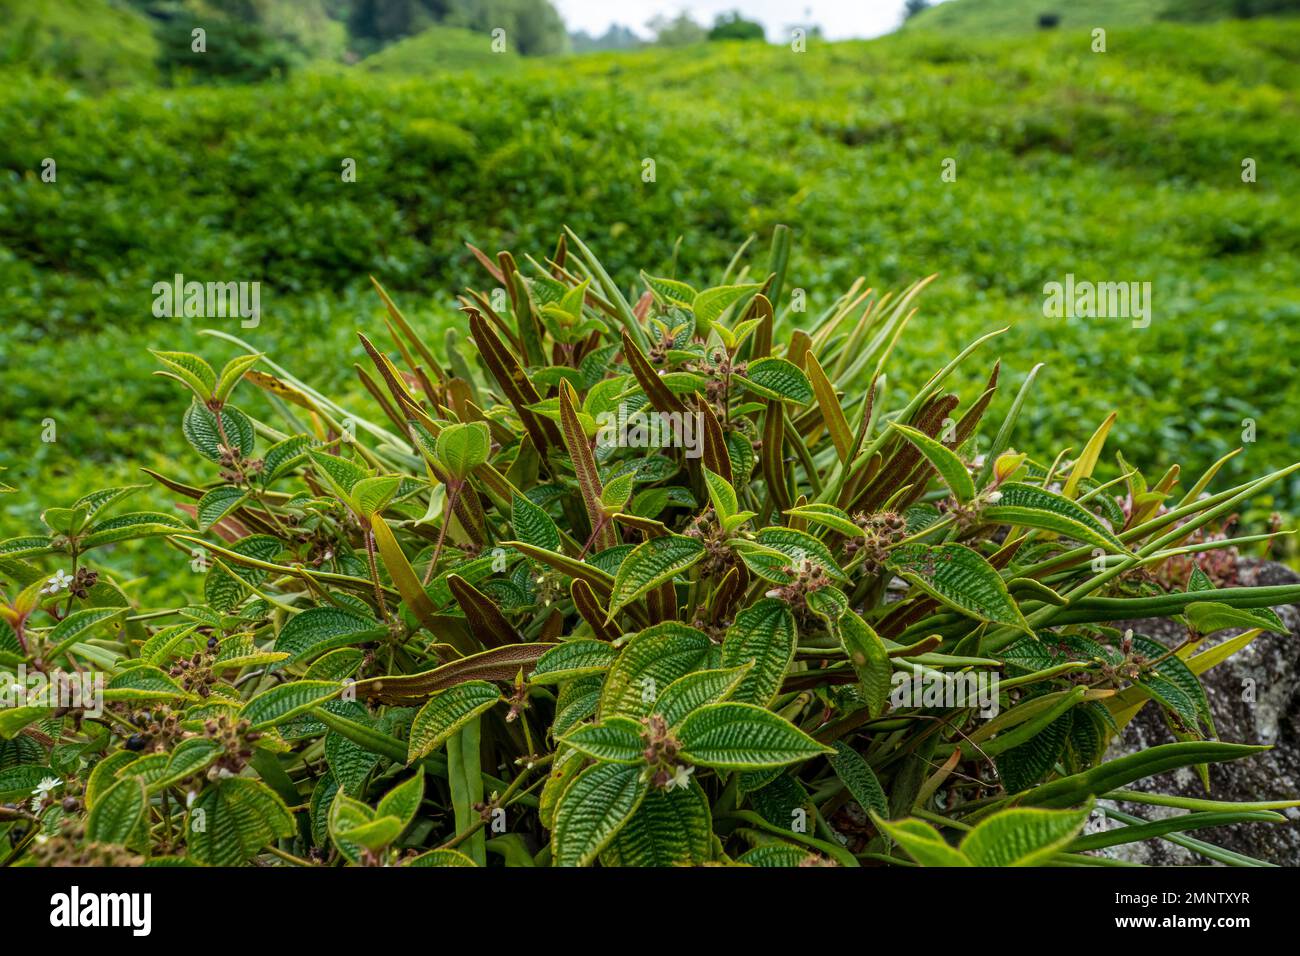 Green leaves pattern, nature plant close up shot of Clidemia Hirta in Cameron Highland, Malaysia. Stock Photo